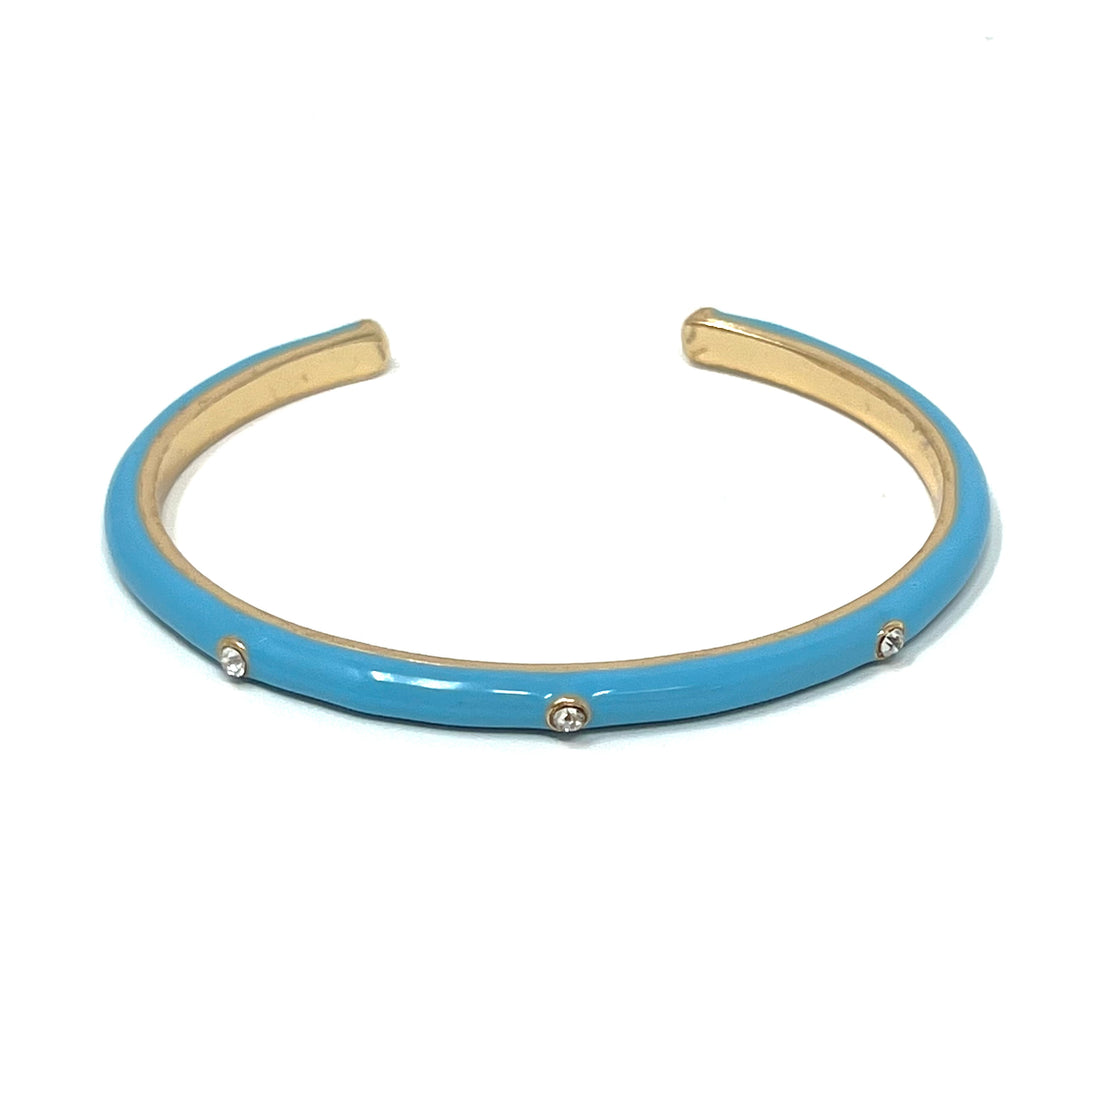 Enamel Cuff with Stones Bracelet in Turquoise